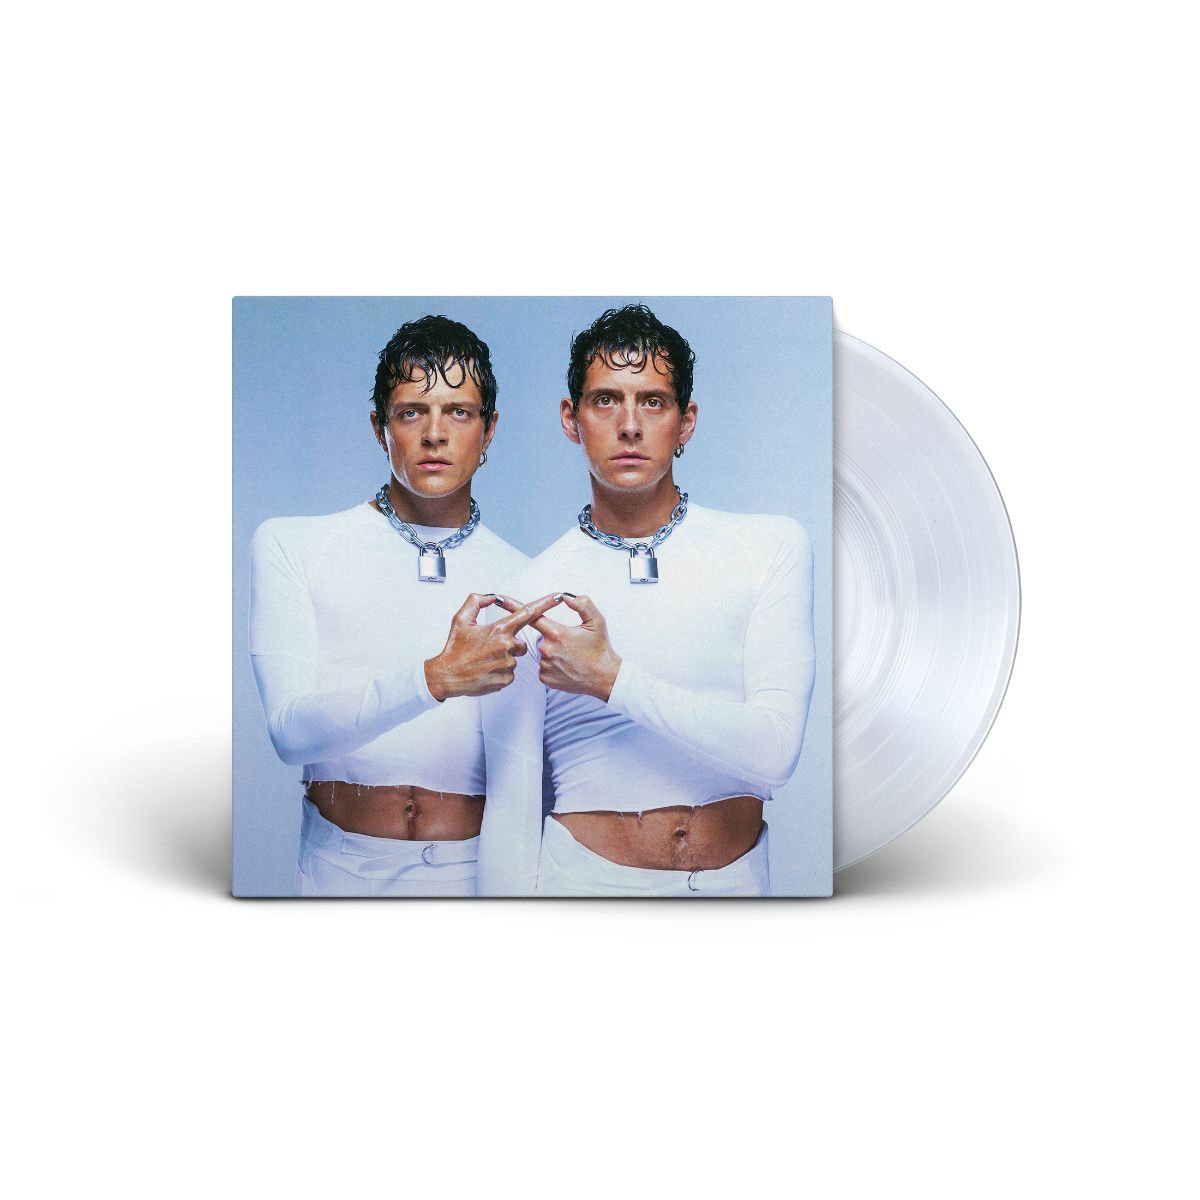 Faux Real - Faux Ever: Crystal Clear Vinyl LP